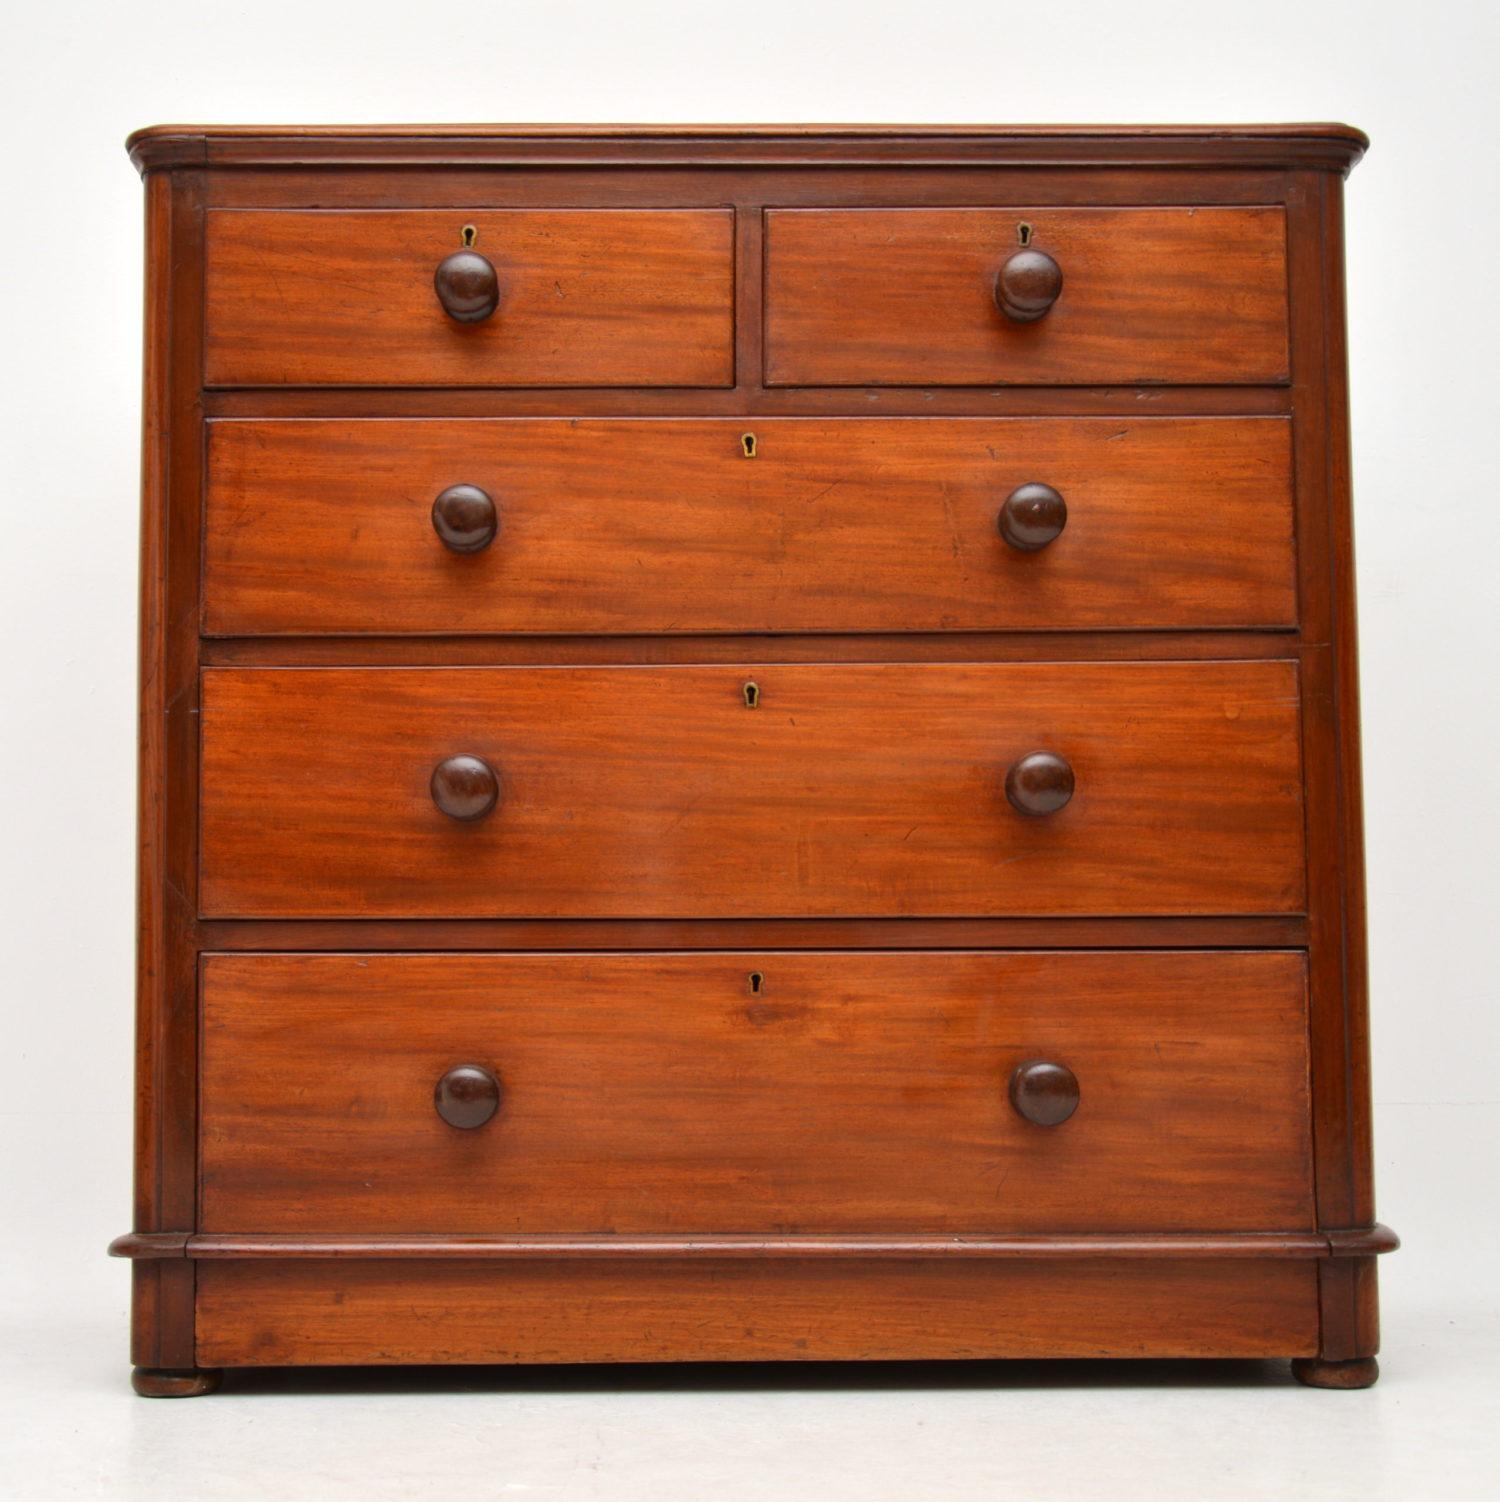 Antique Victorian mahogany chest of drawers in good original condition & with plenty of character. These chests are always very popular because they have so much storage with no waste of space. This one has a solid mahogany top, rounded corners,